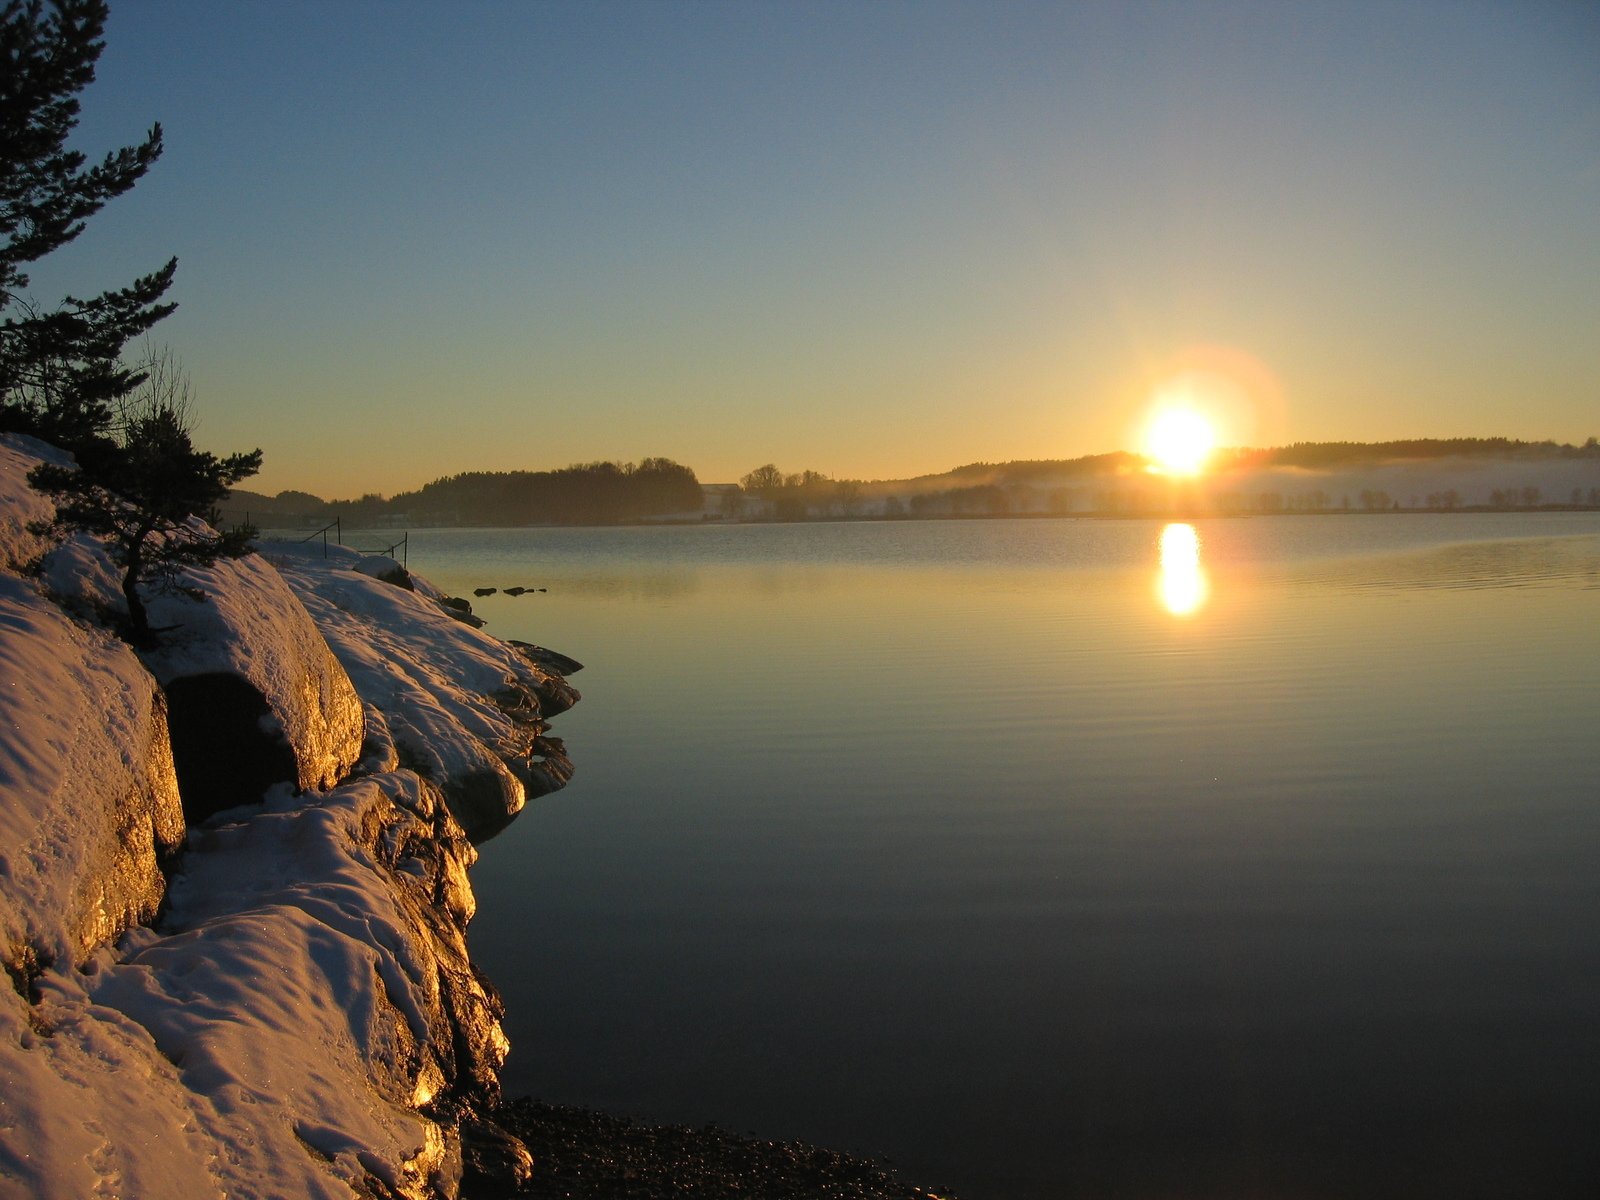 the sun rising over the lake in a wintery landscape